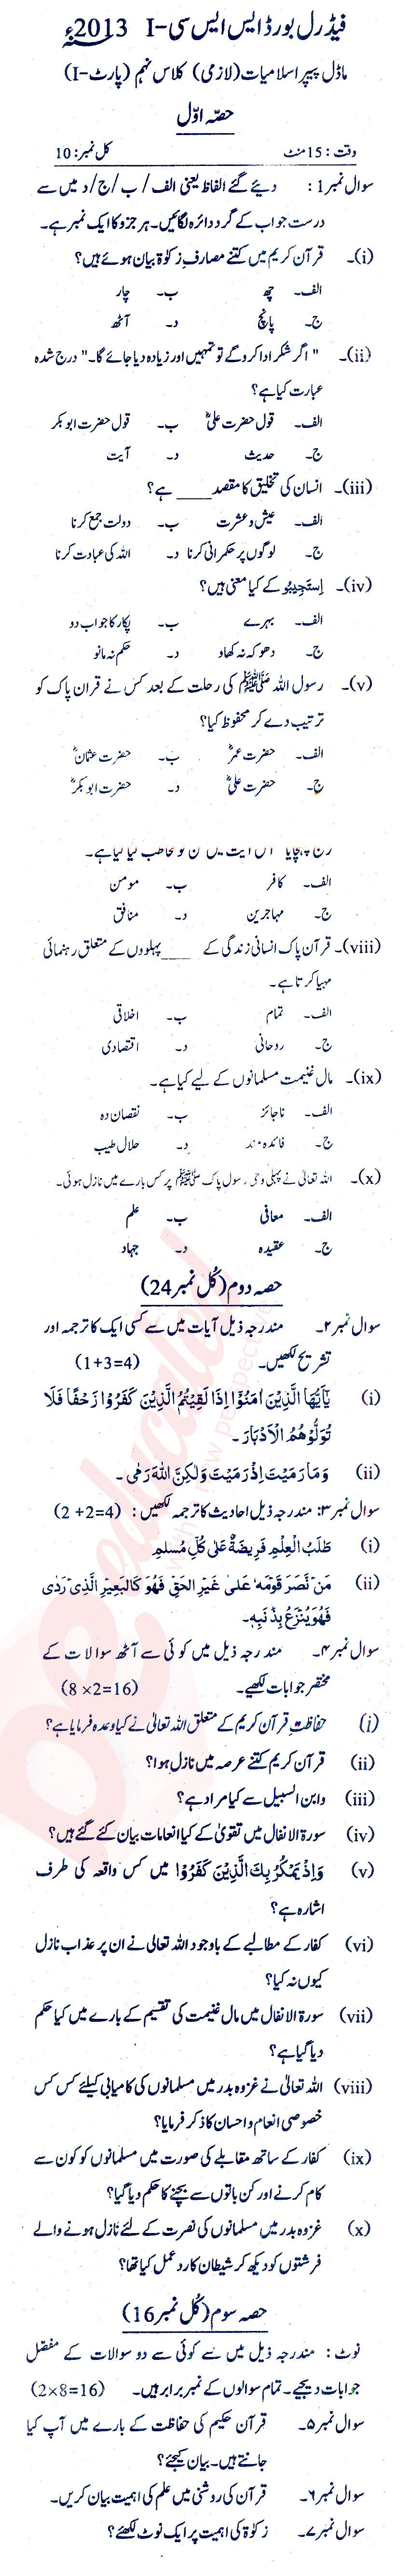 Islamiat (Compulsory) 9th class Past Paper Group 1 Federal BISE  2013